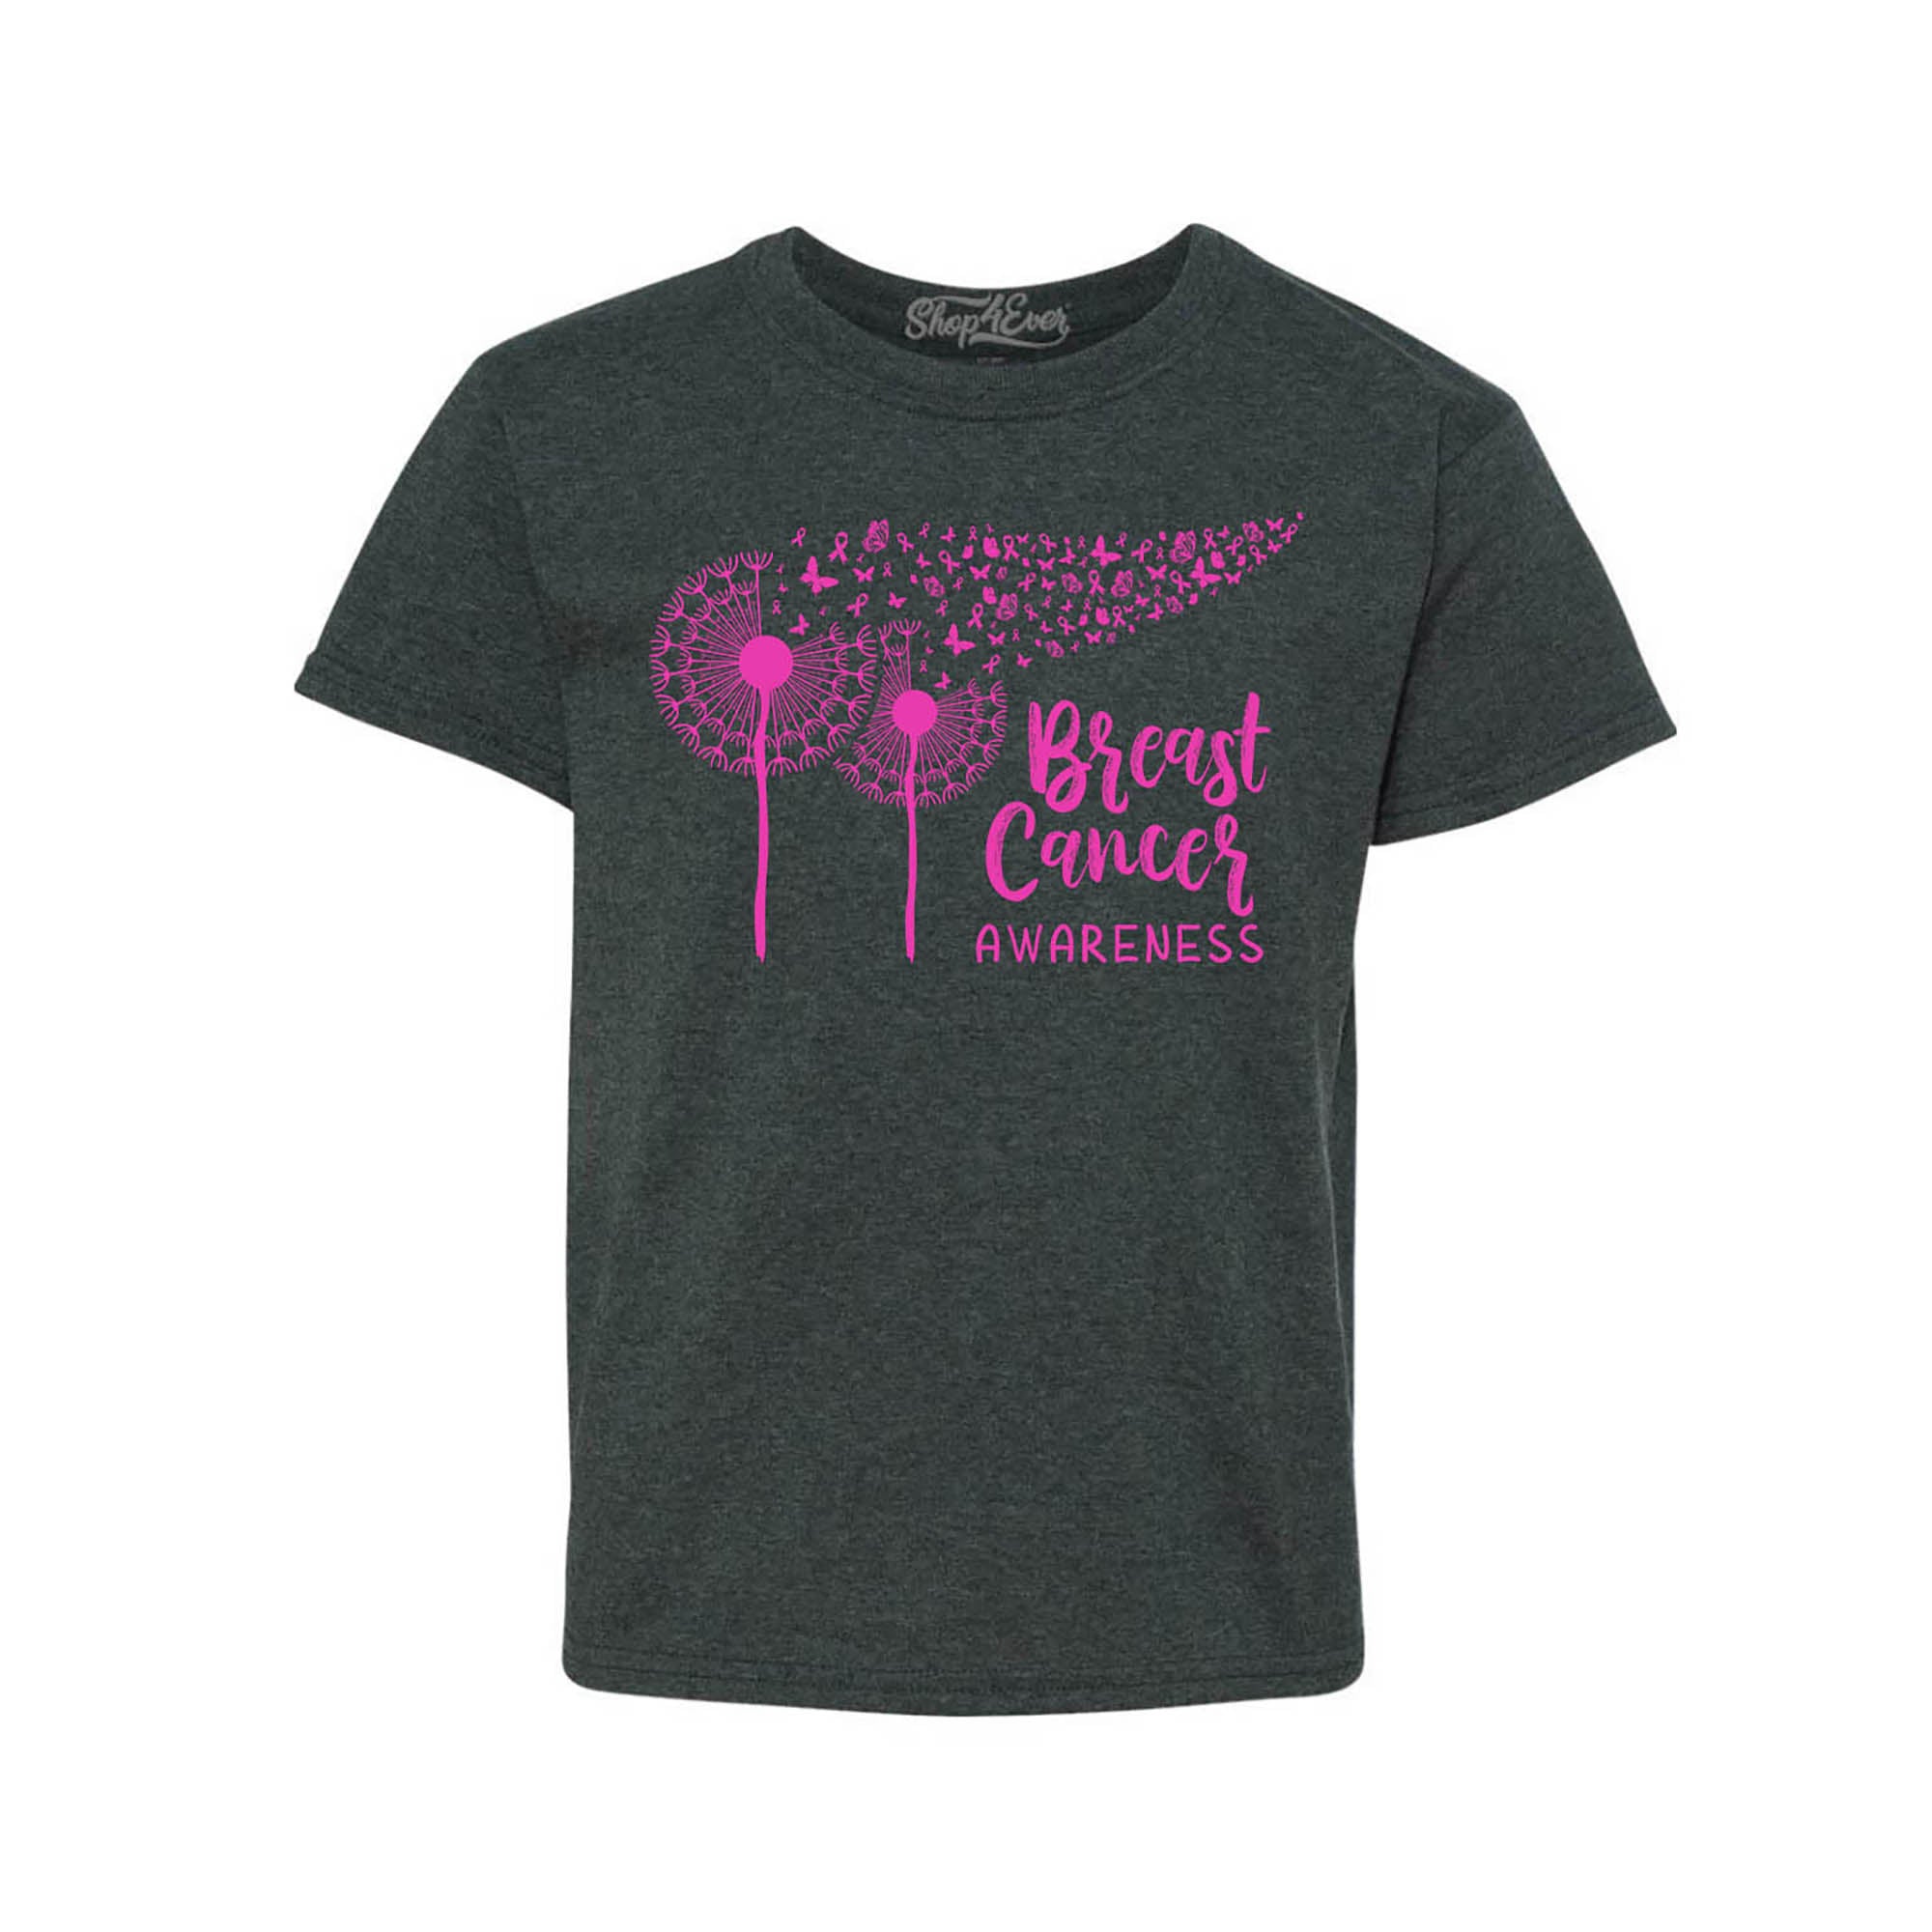 Dandelion Breast Cancer Awareness Youth's T-Shirt